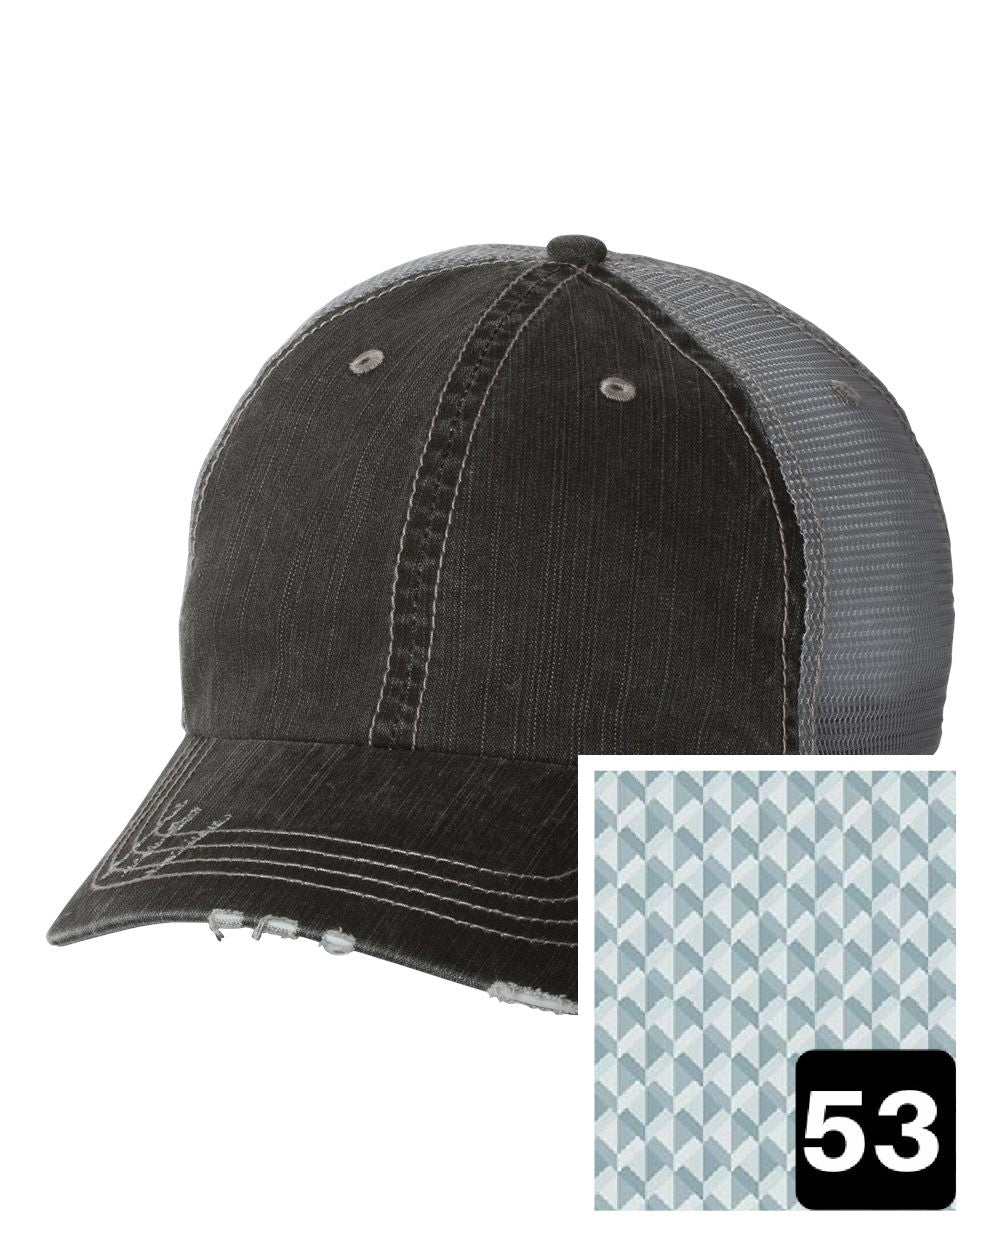 gray distressed trucker hat with multi-color stripe fabric state of Ohio